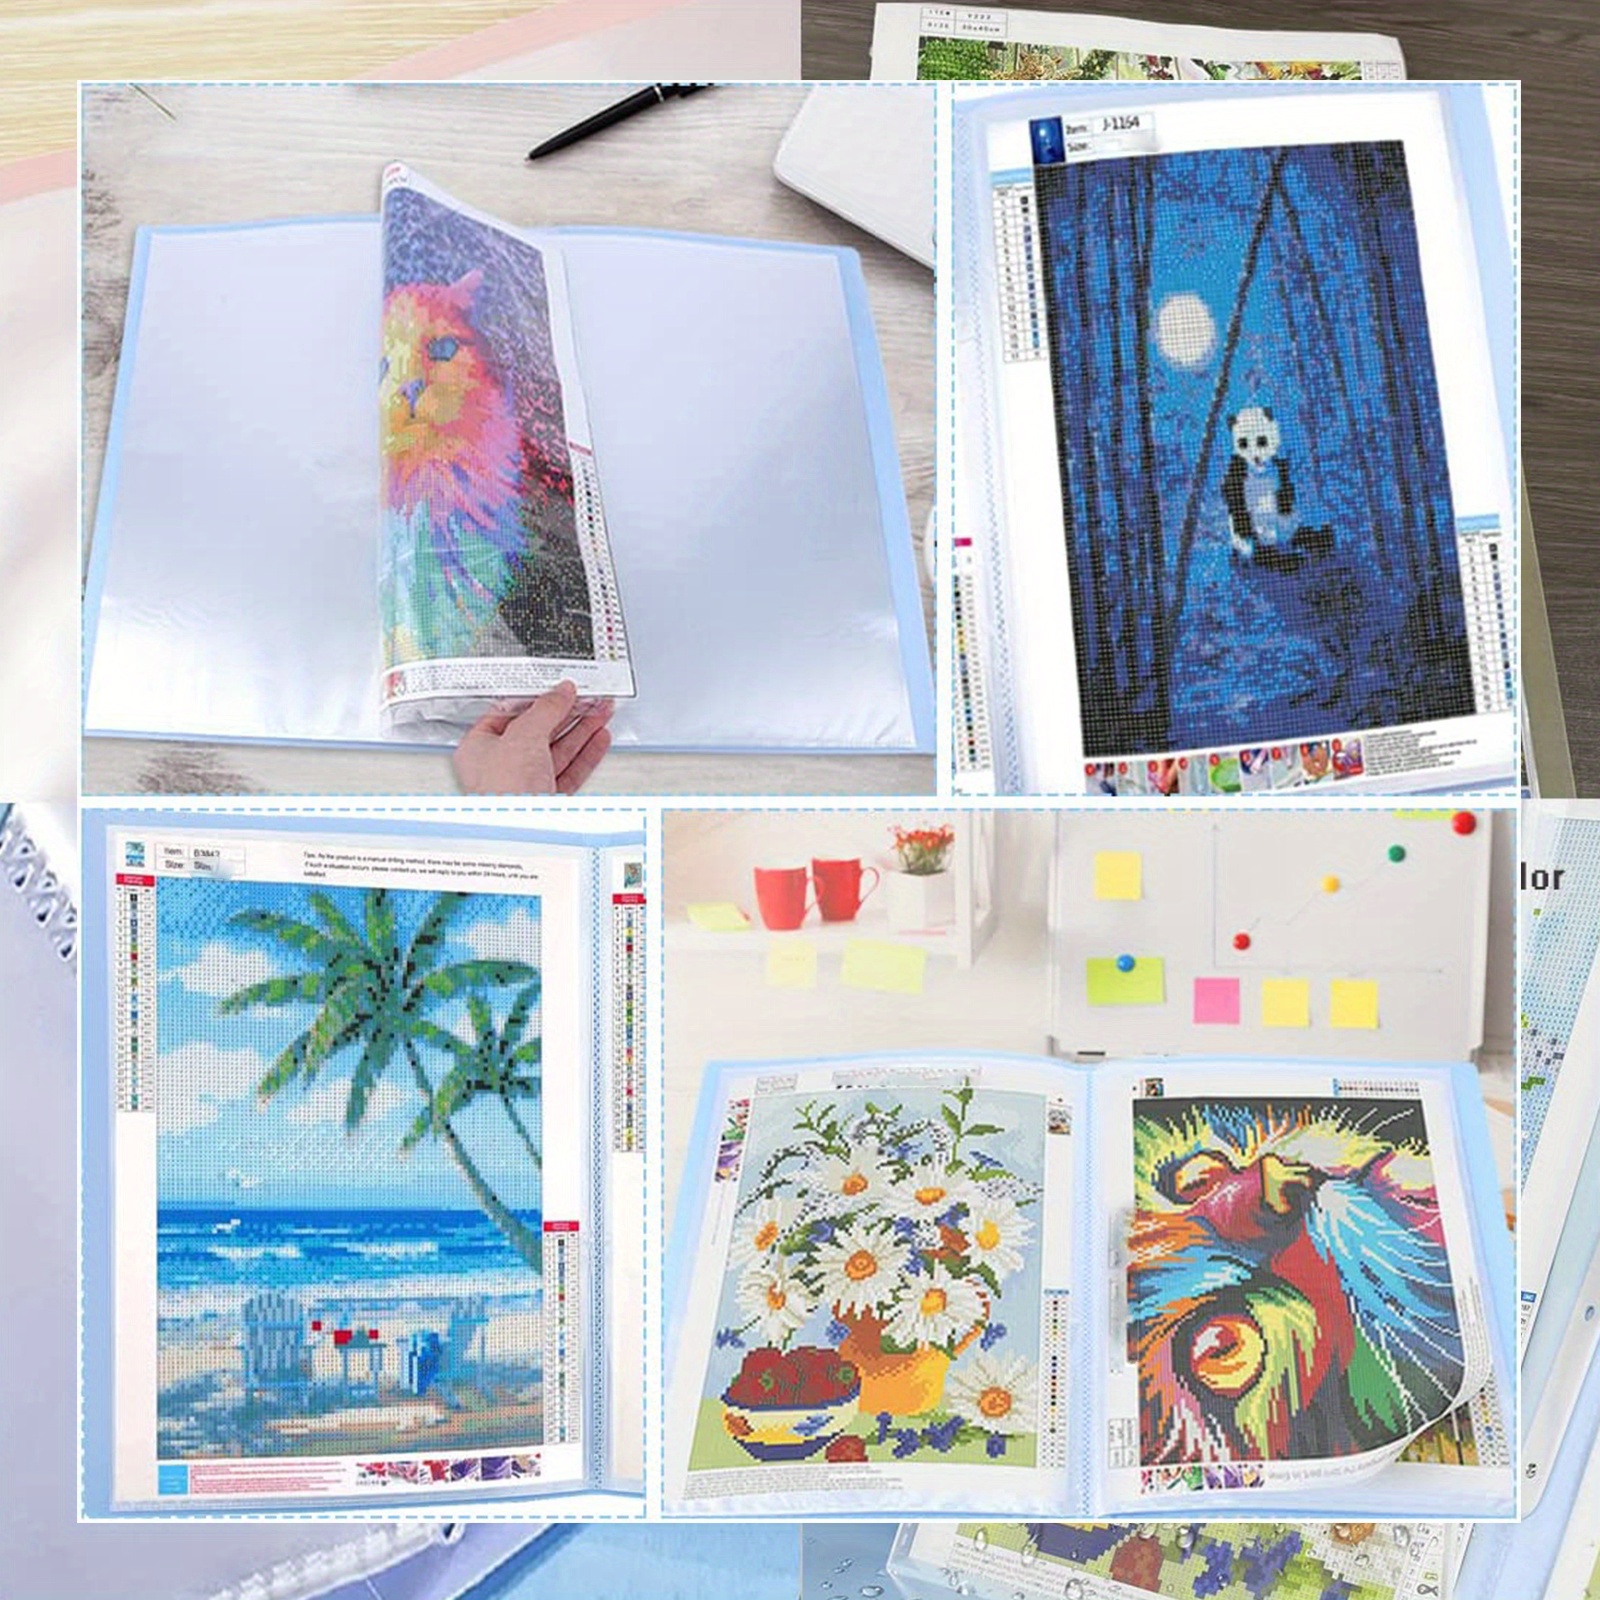 A3 Artificial Diamond Painting Storage Book For Kits Artificial Diamond Art  Portfolio Book For Painting Accessories With 30/40 Pags Clear Pockets  Plastic Sleeves Pp Material - Temu Austria